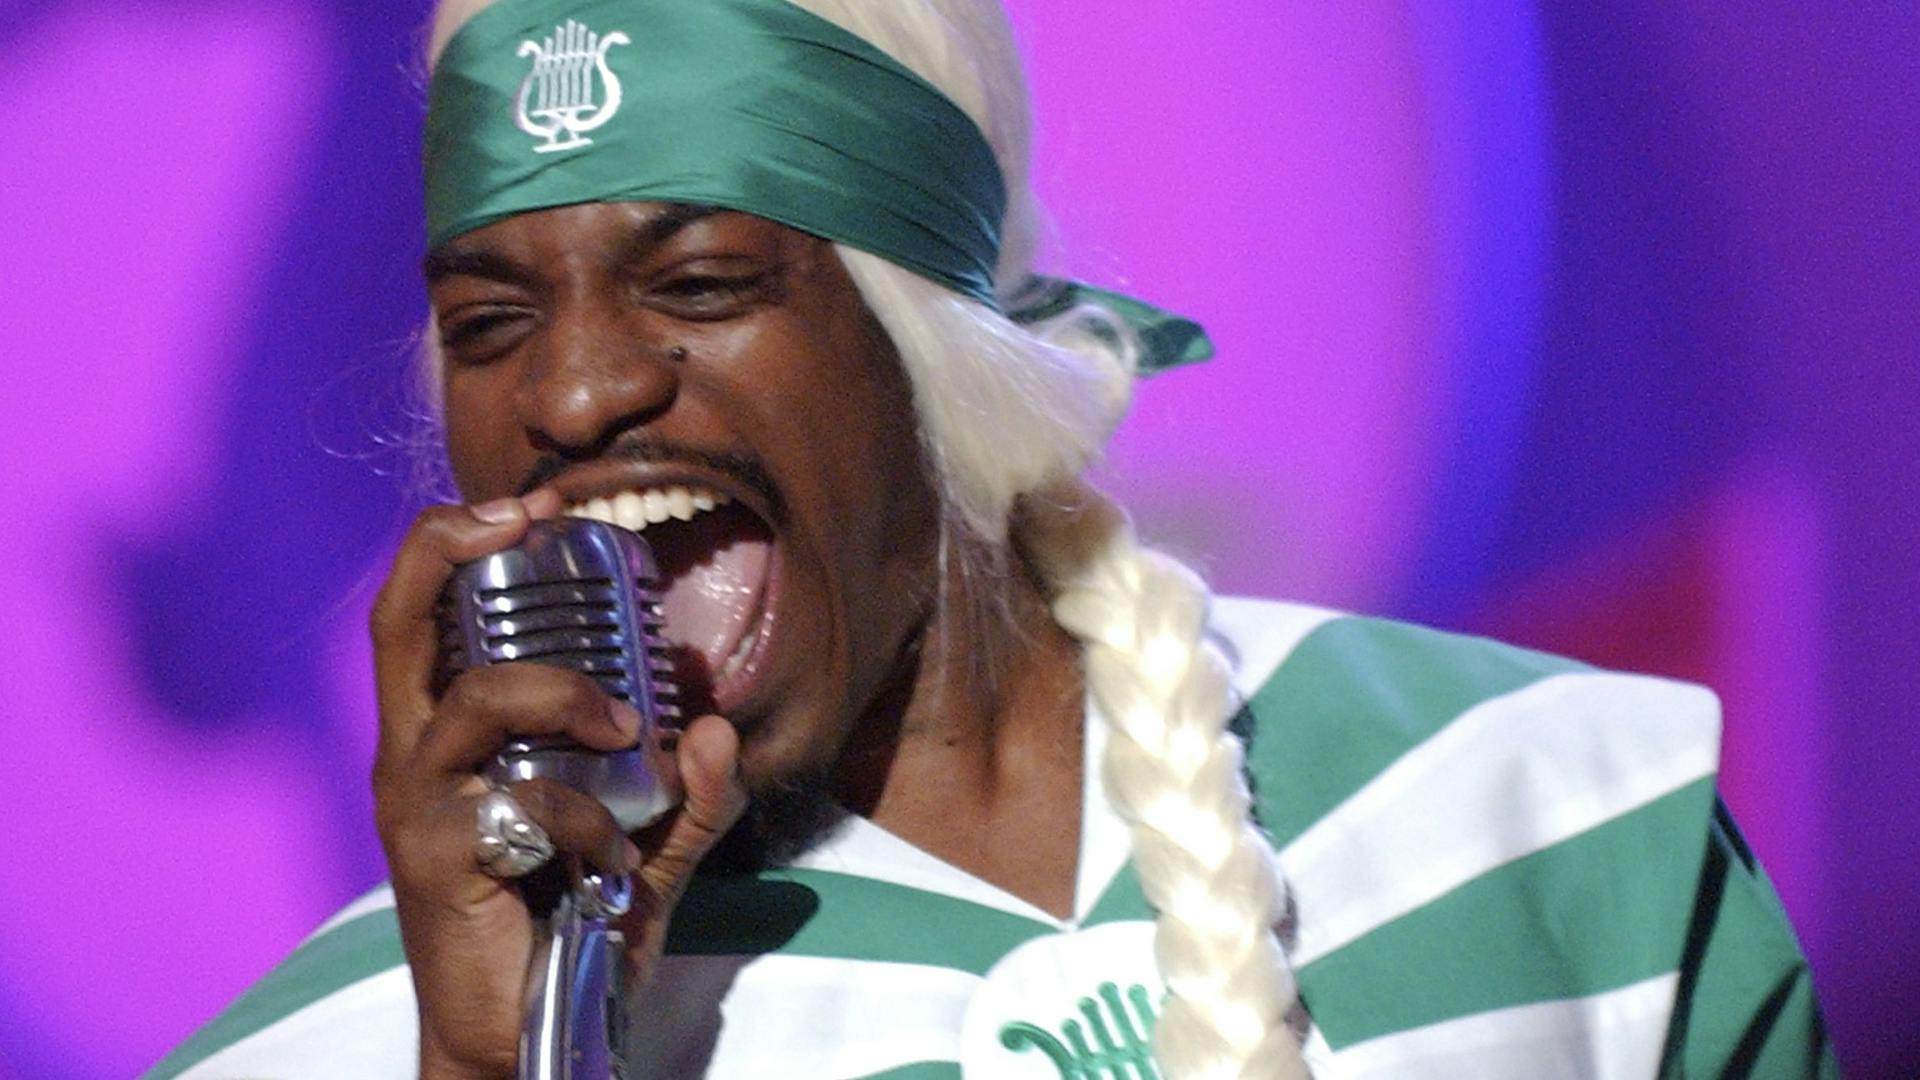 Andre 3000 of Outkast performs 